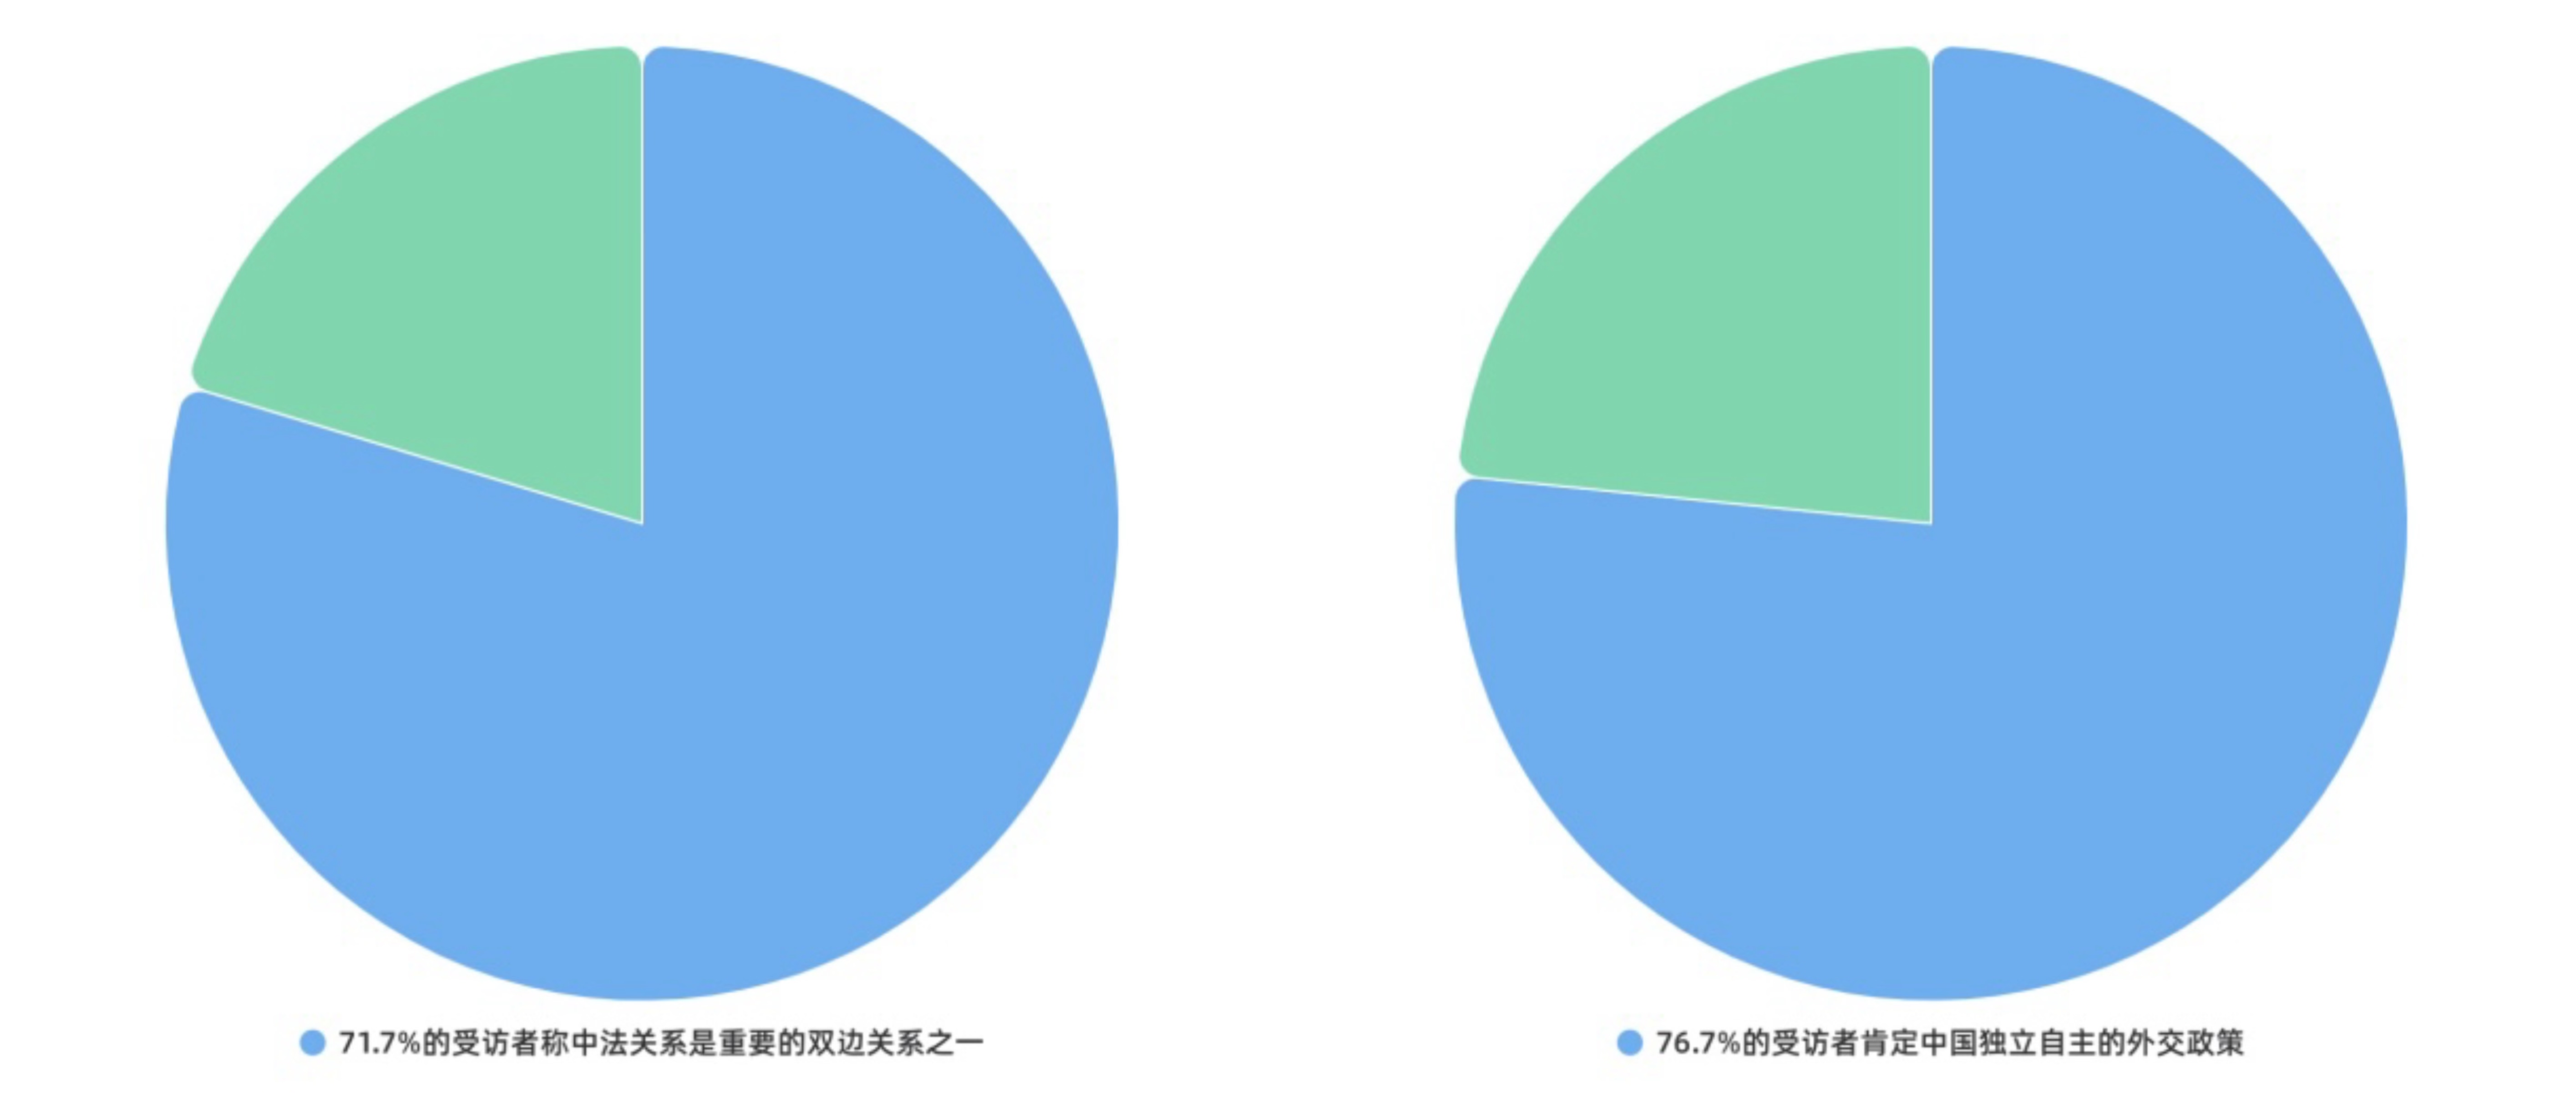 The chart on the left shows 71.7 percent of respondents to a new poll  believe that the China-France relationship is one of the most important in the world. The chart on the right shows 76.7 percent of respondents believe that China has pursued an independent foreign policy. /CGTN